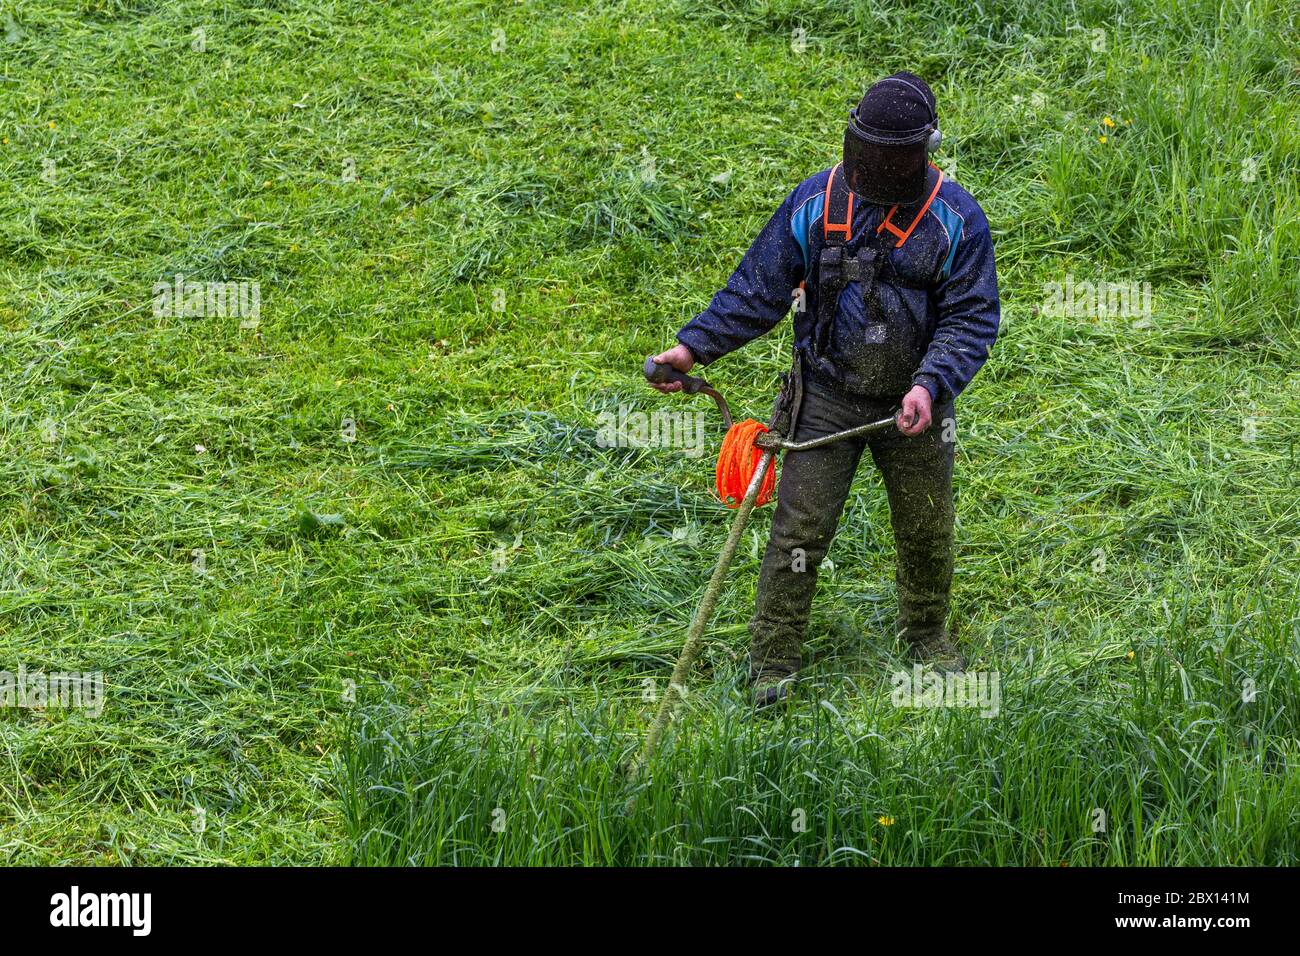 lawnmower man with string trimmer and face mask trimmong grass - close-up Stock Photo